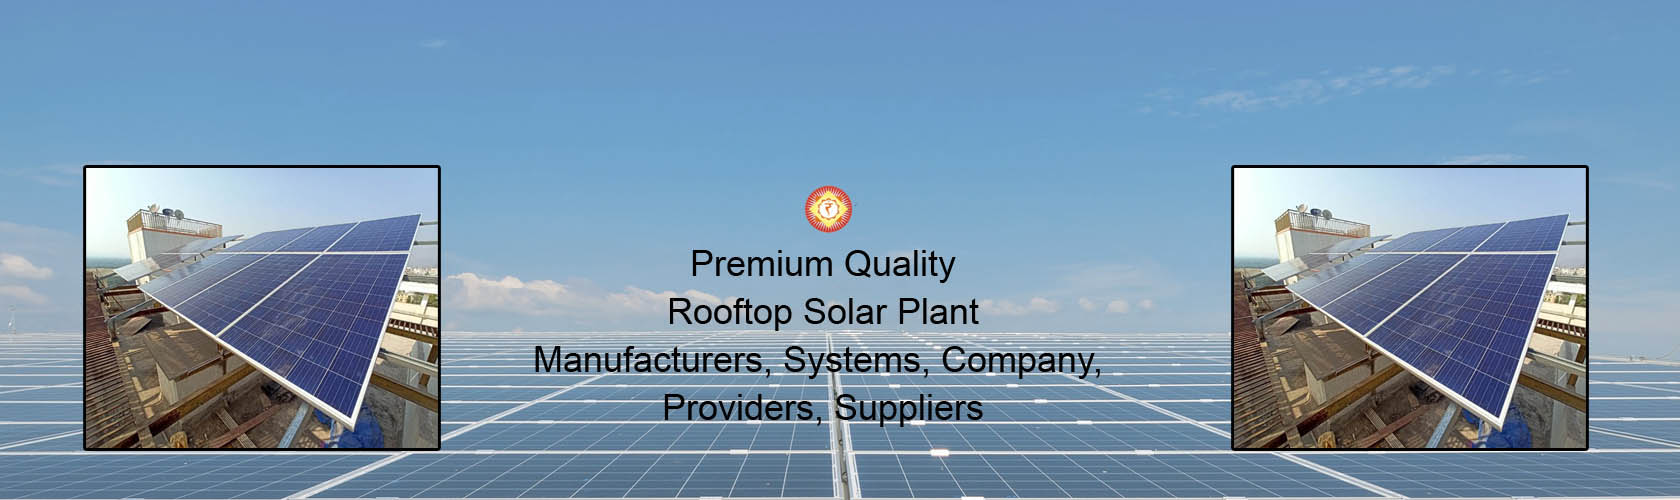 Rooftop Solar Plant